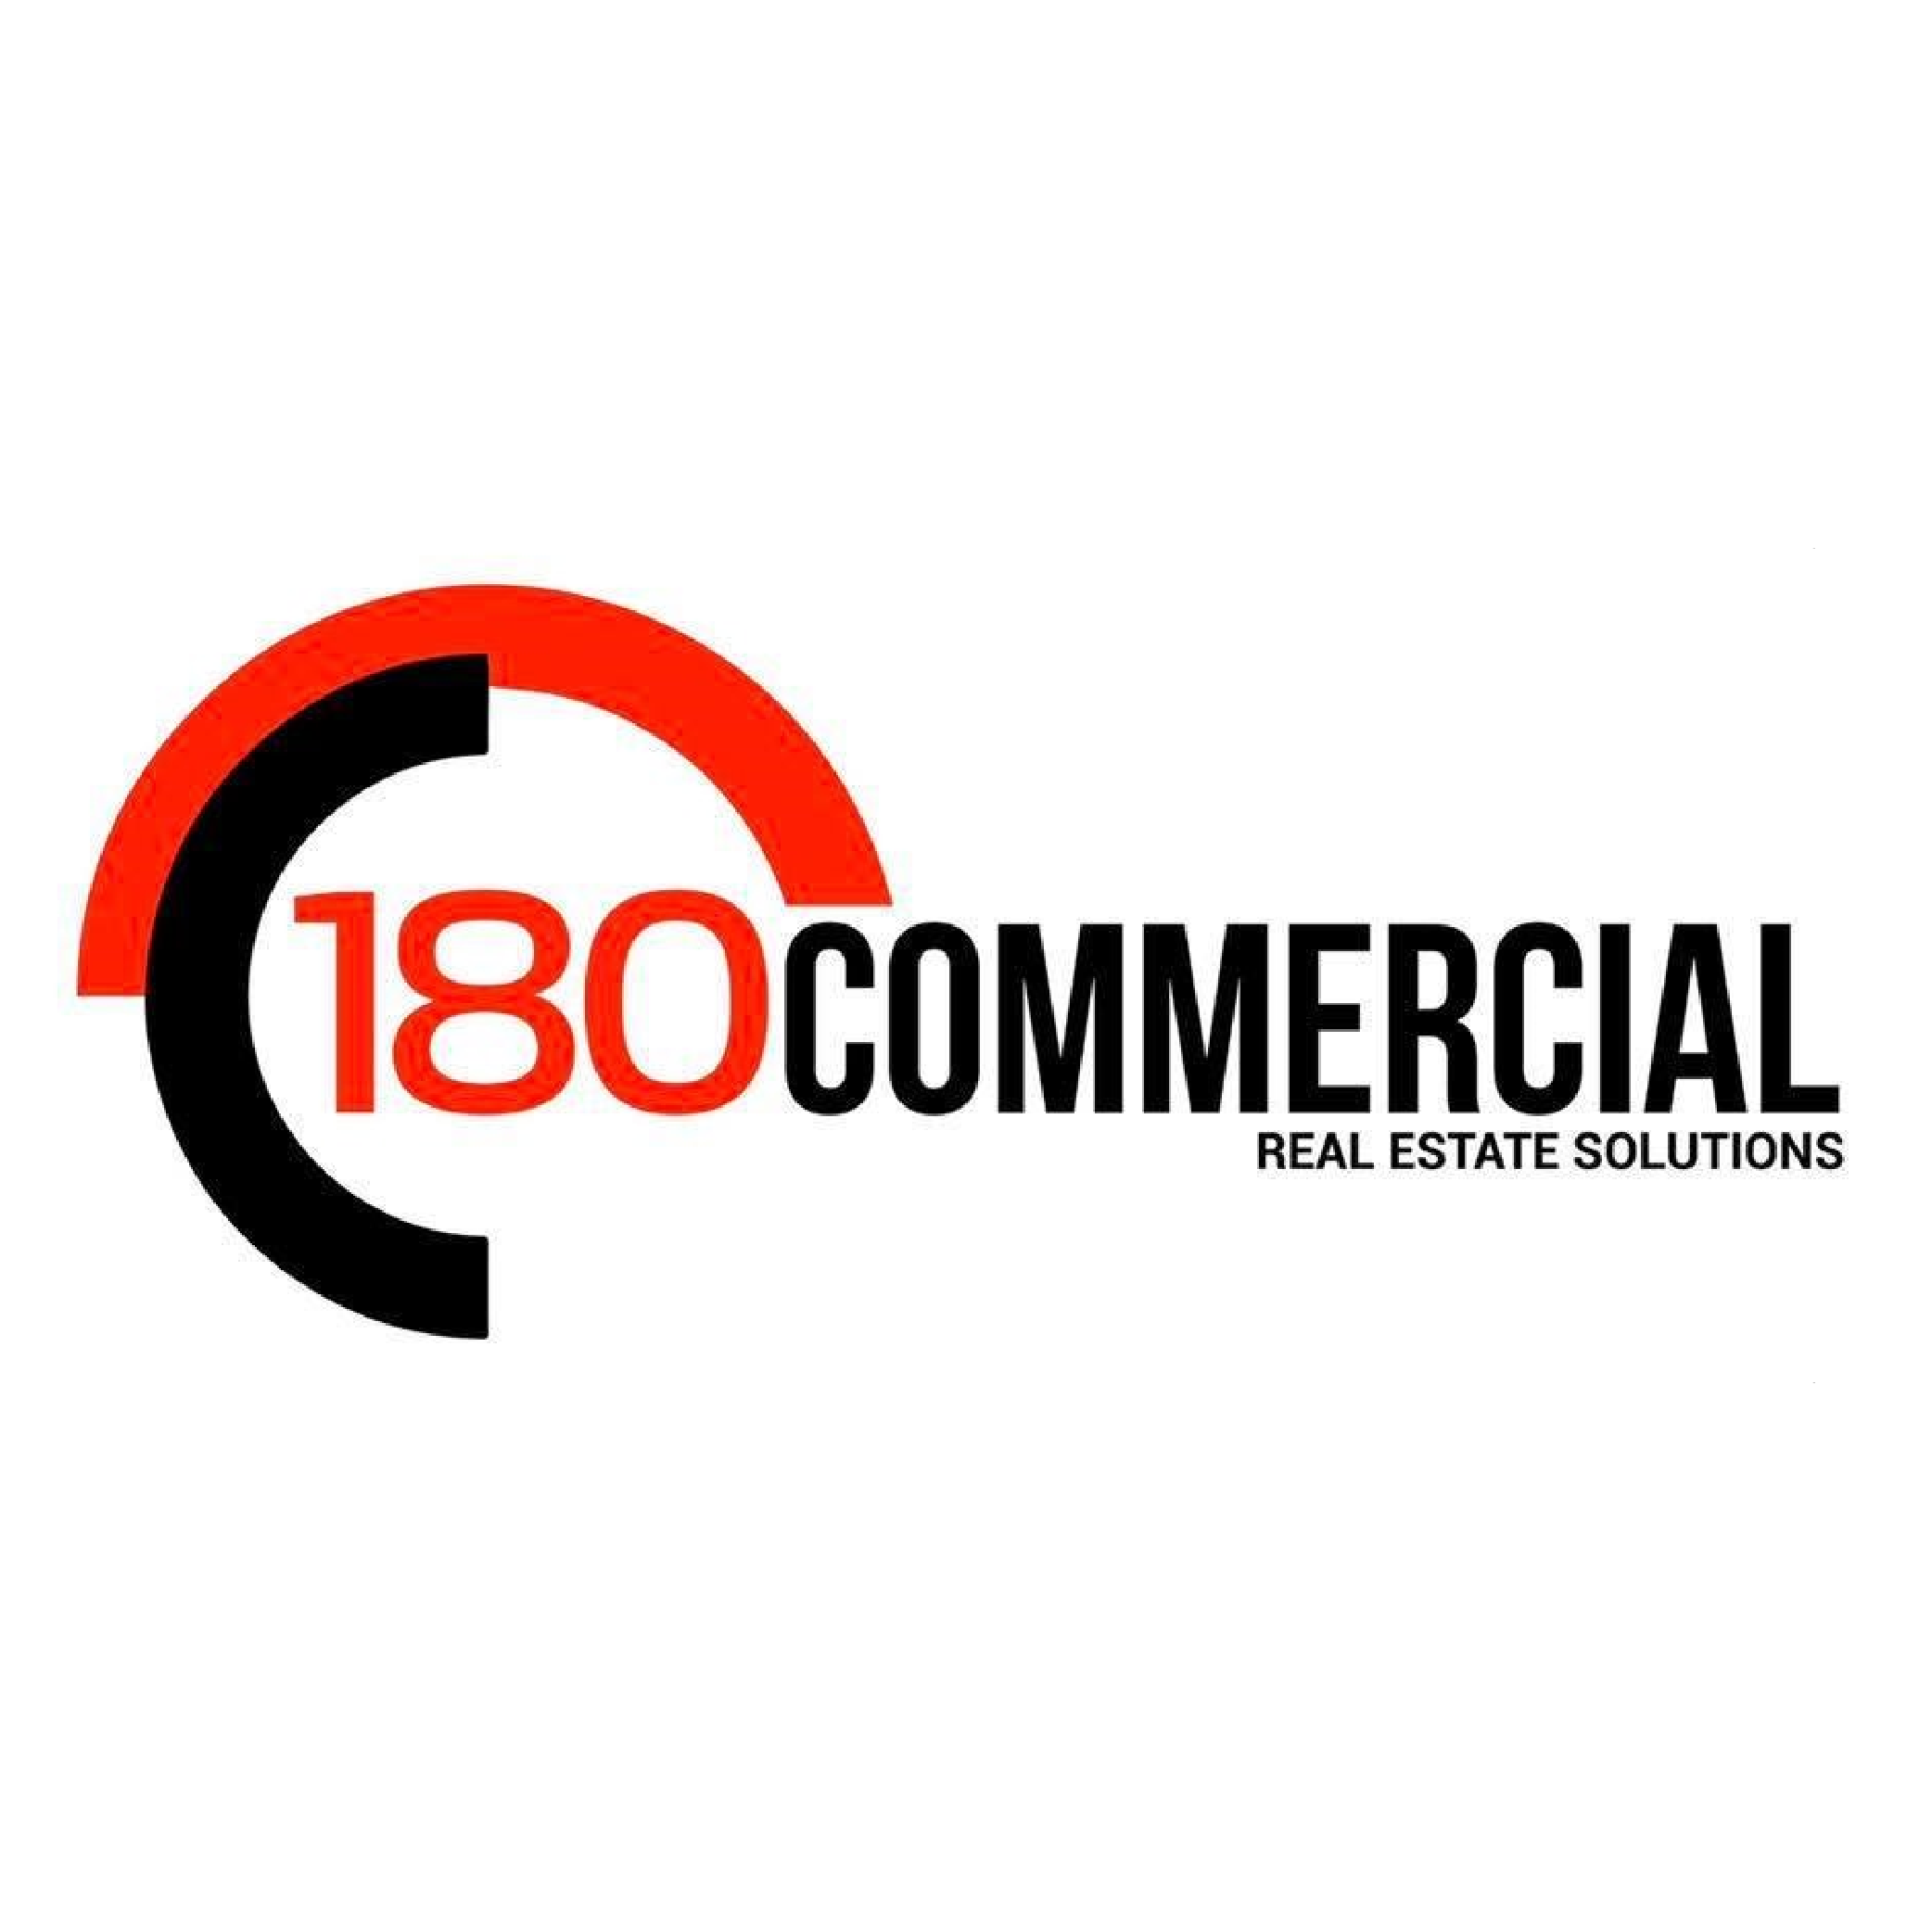 180 Commercial